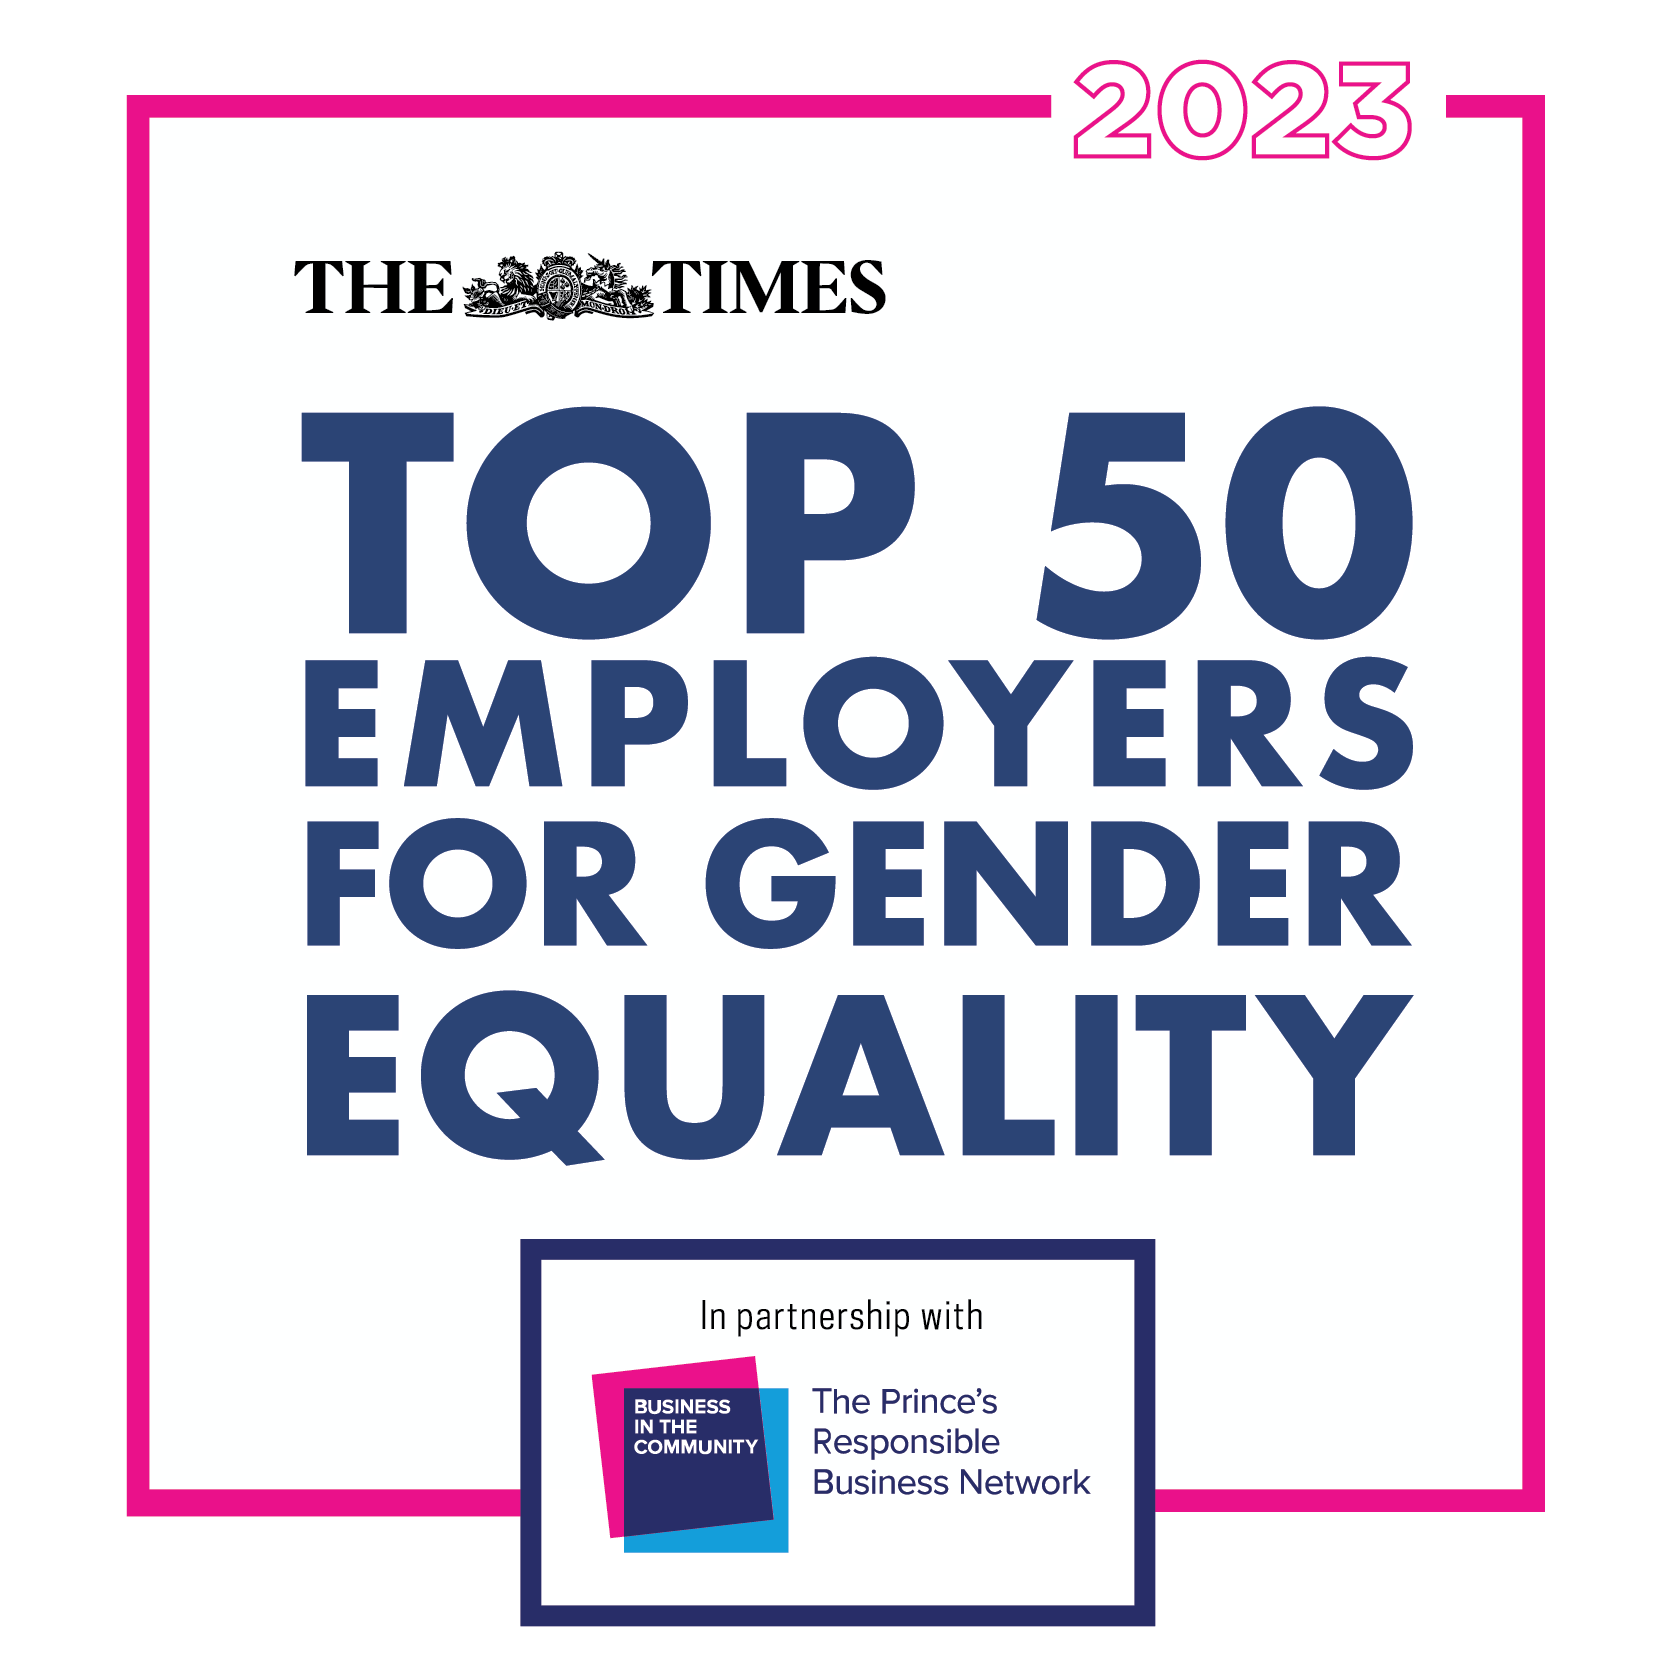 The Times Top 50 Employers for Gender Equality logo